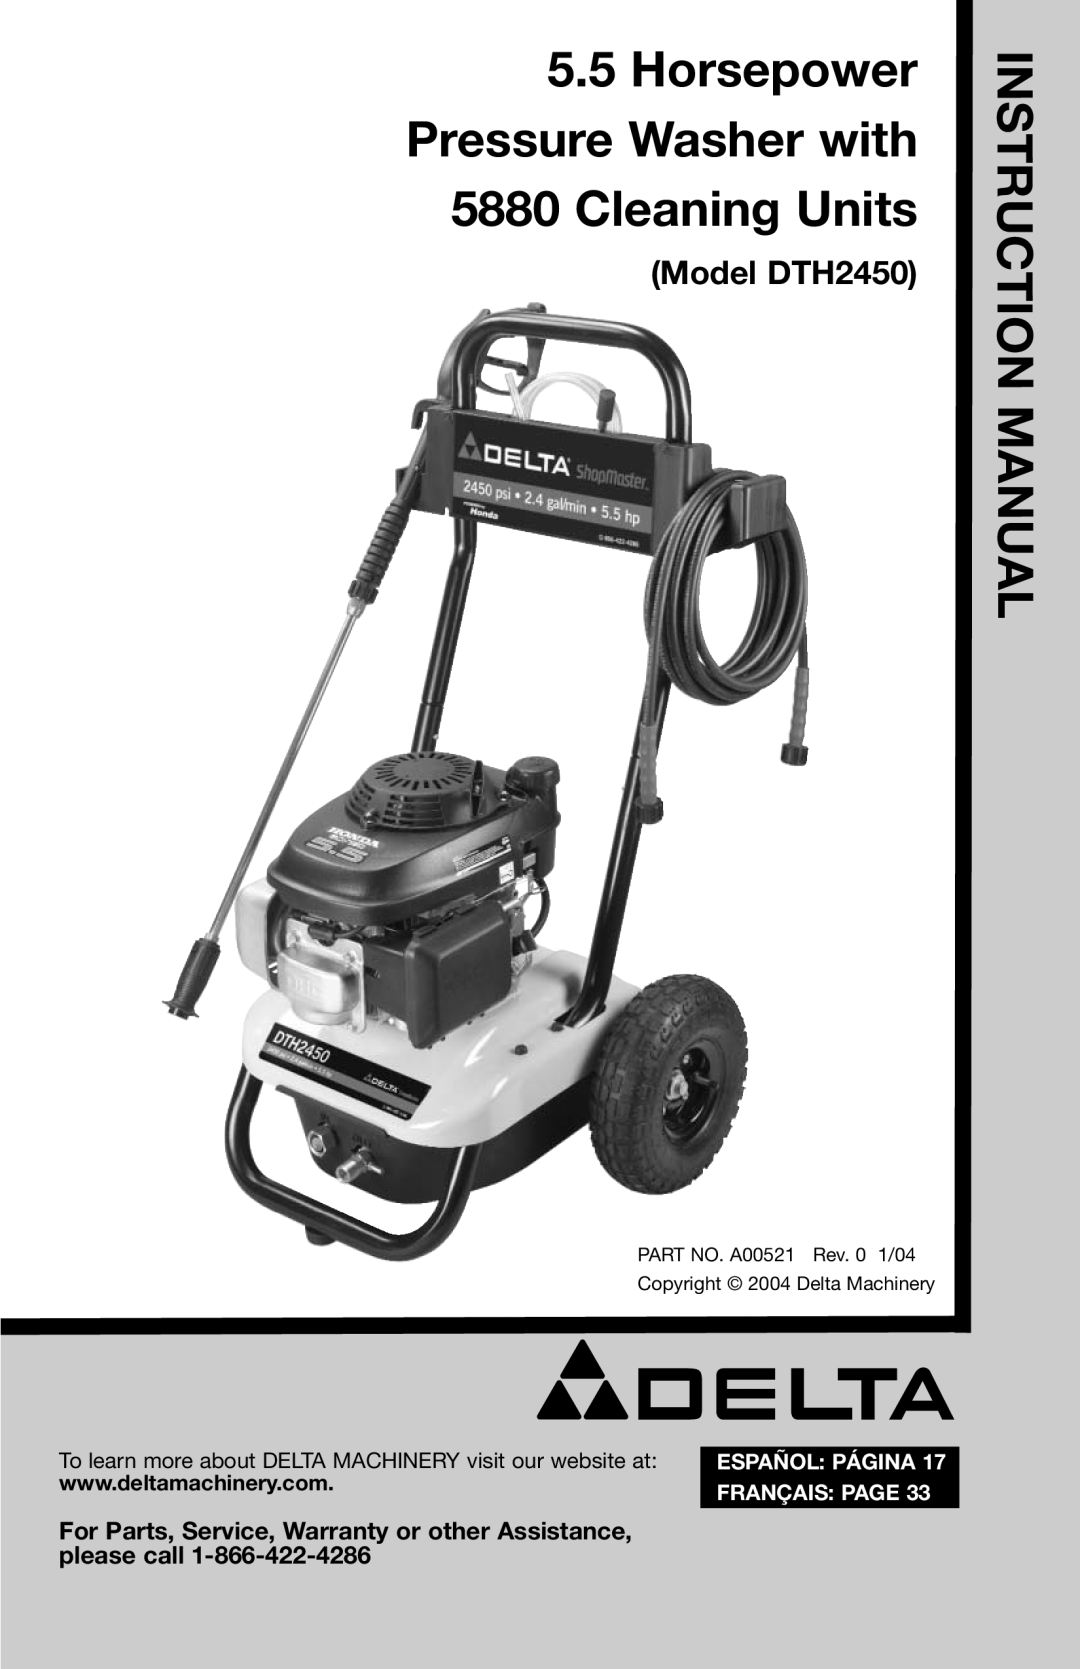 Delta instruction manual Horsepower Pressure Washer with 5880 Cleaning Units, Structioin N M Anual, Model DTH2450 